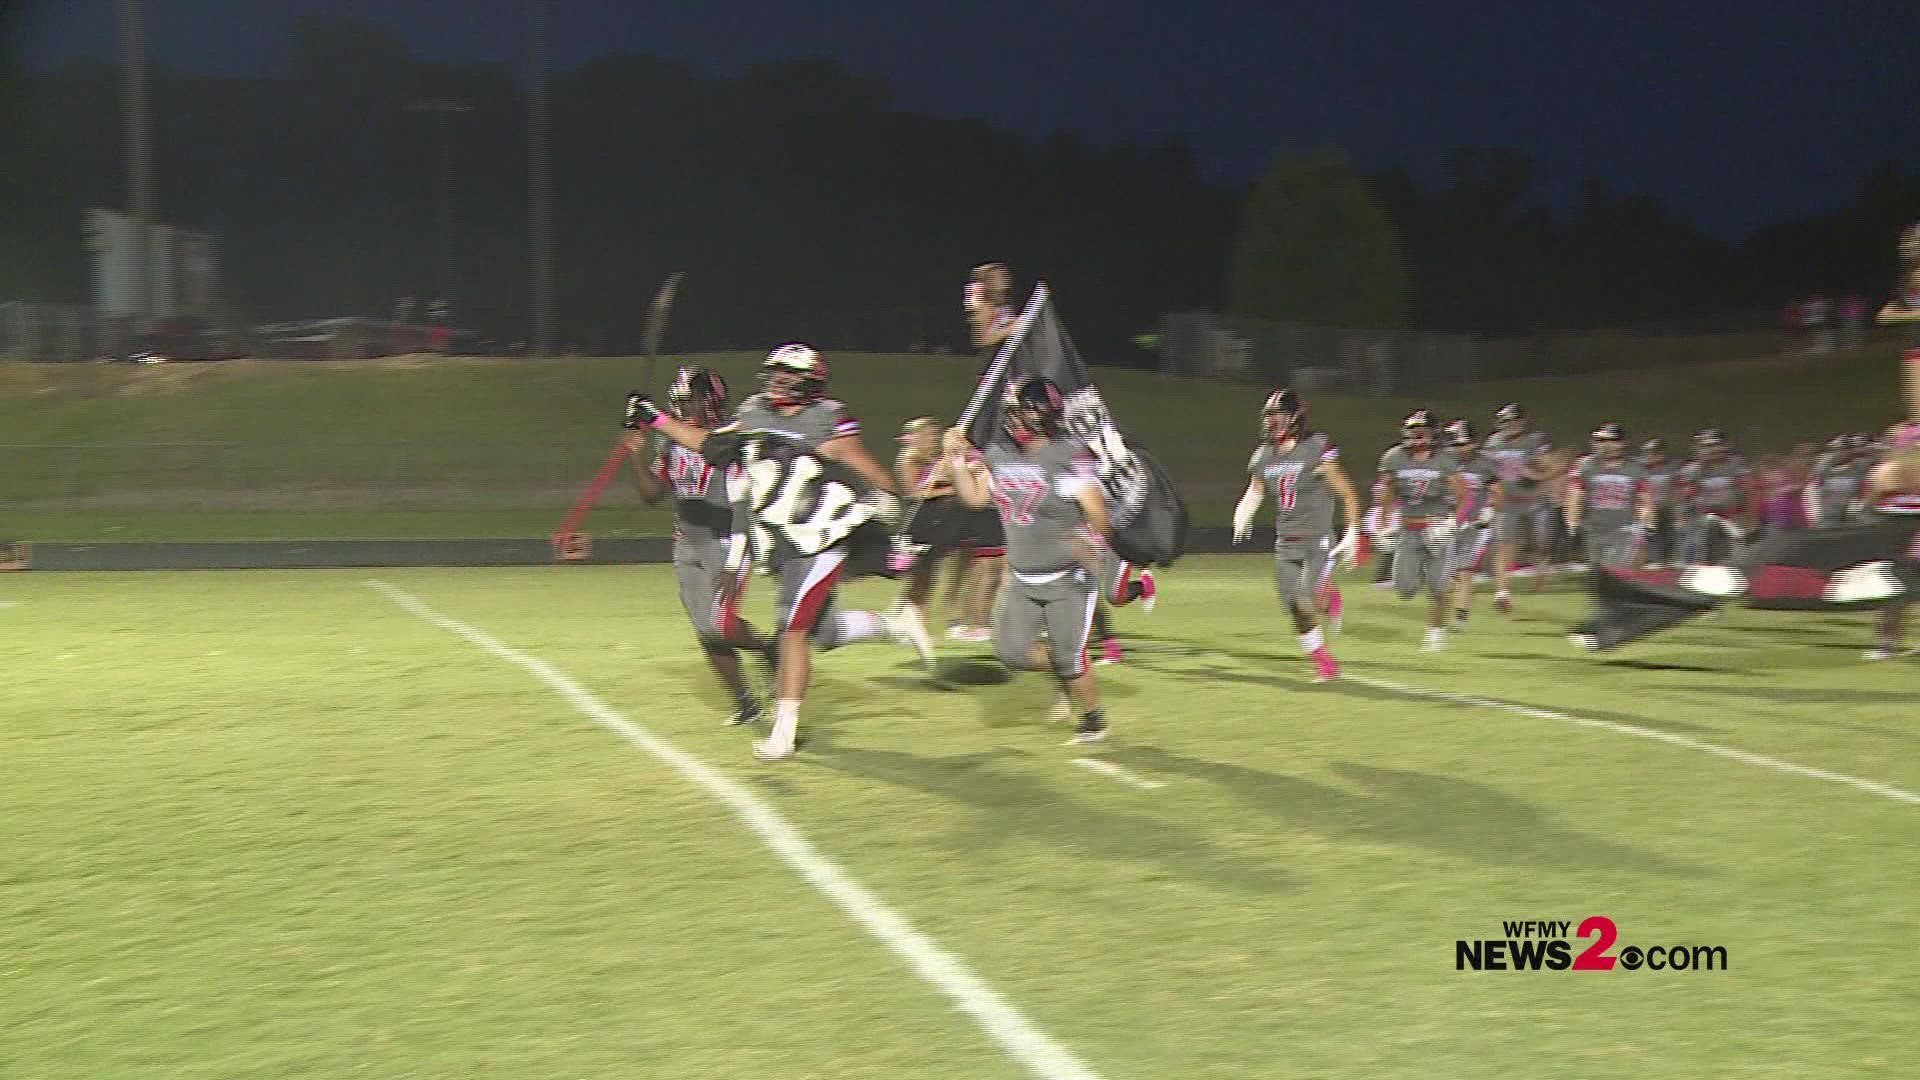 Week 7 highlights between two undefeated teams in Ledford and Central Davidson.